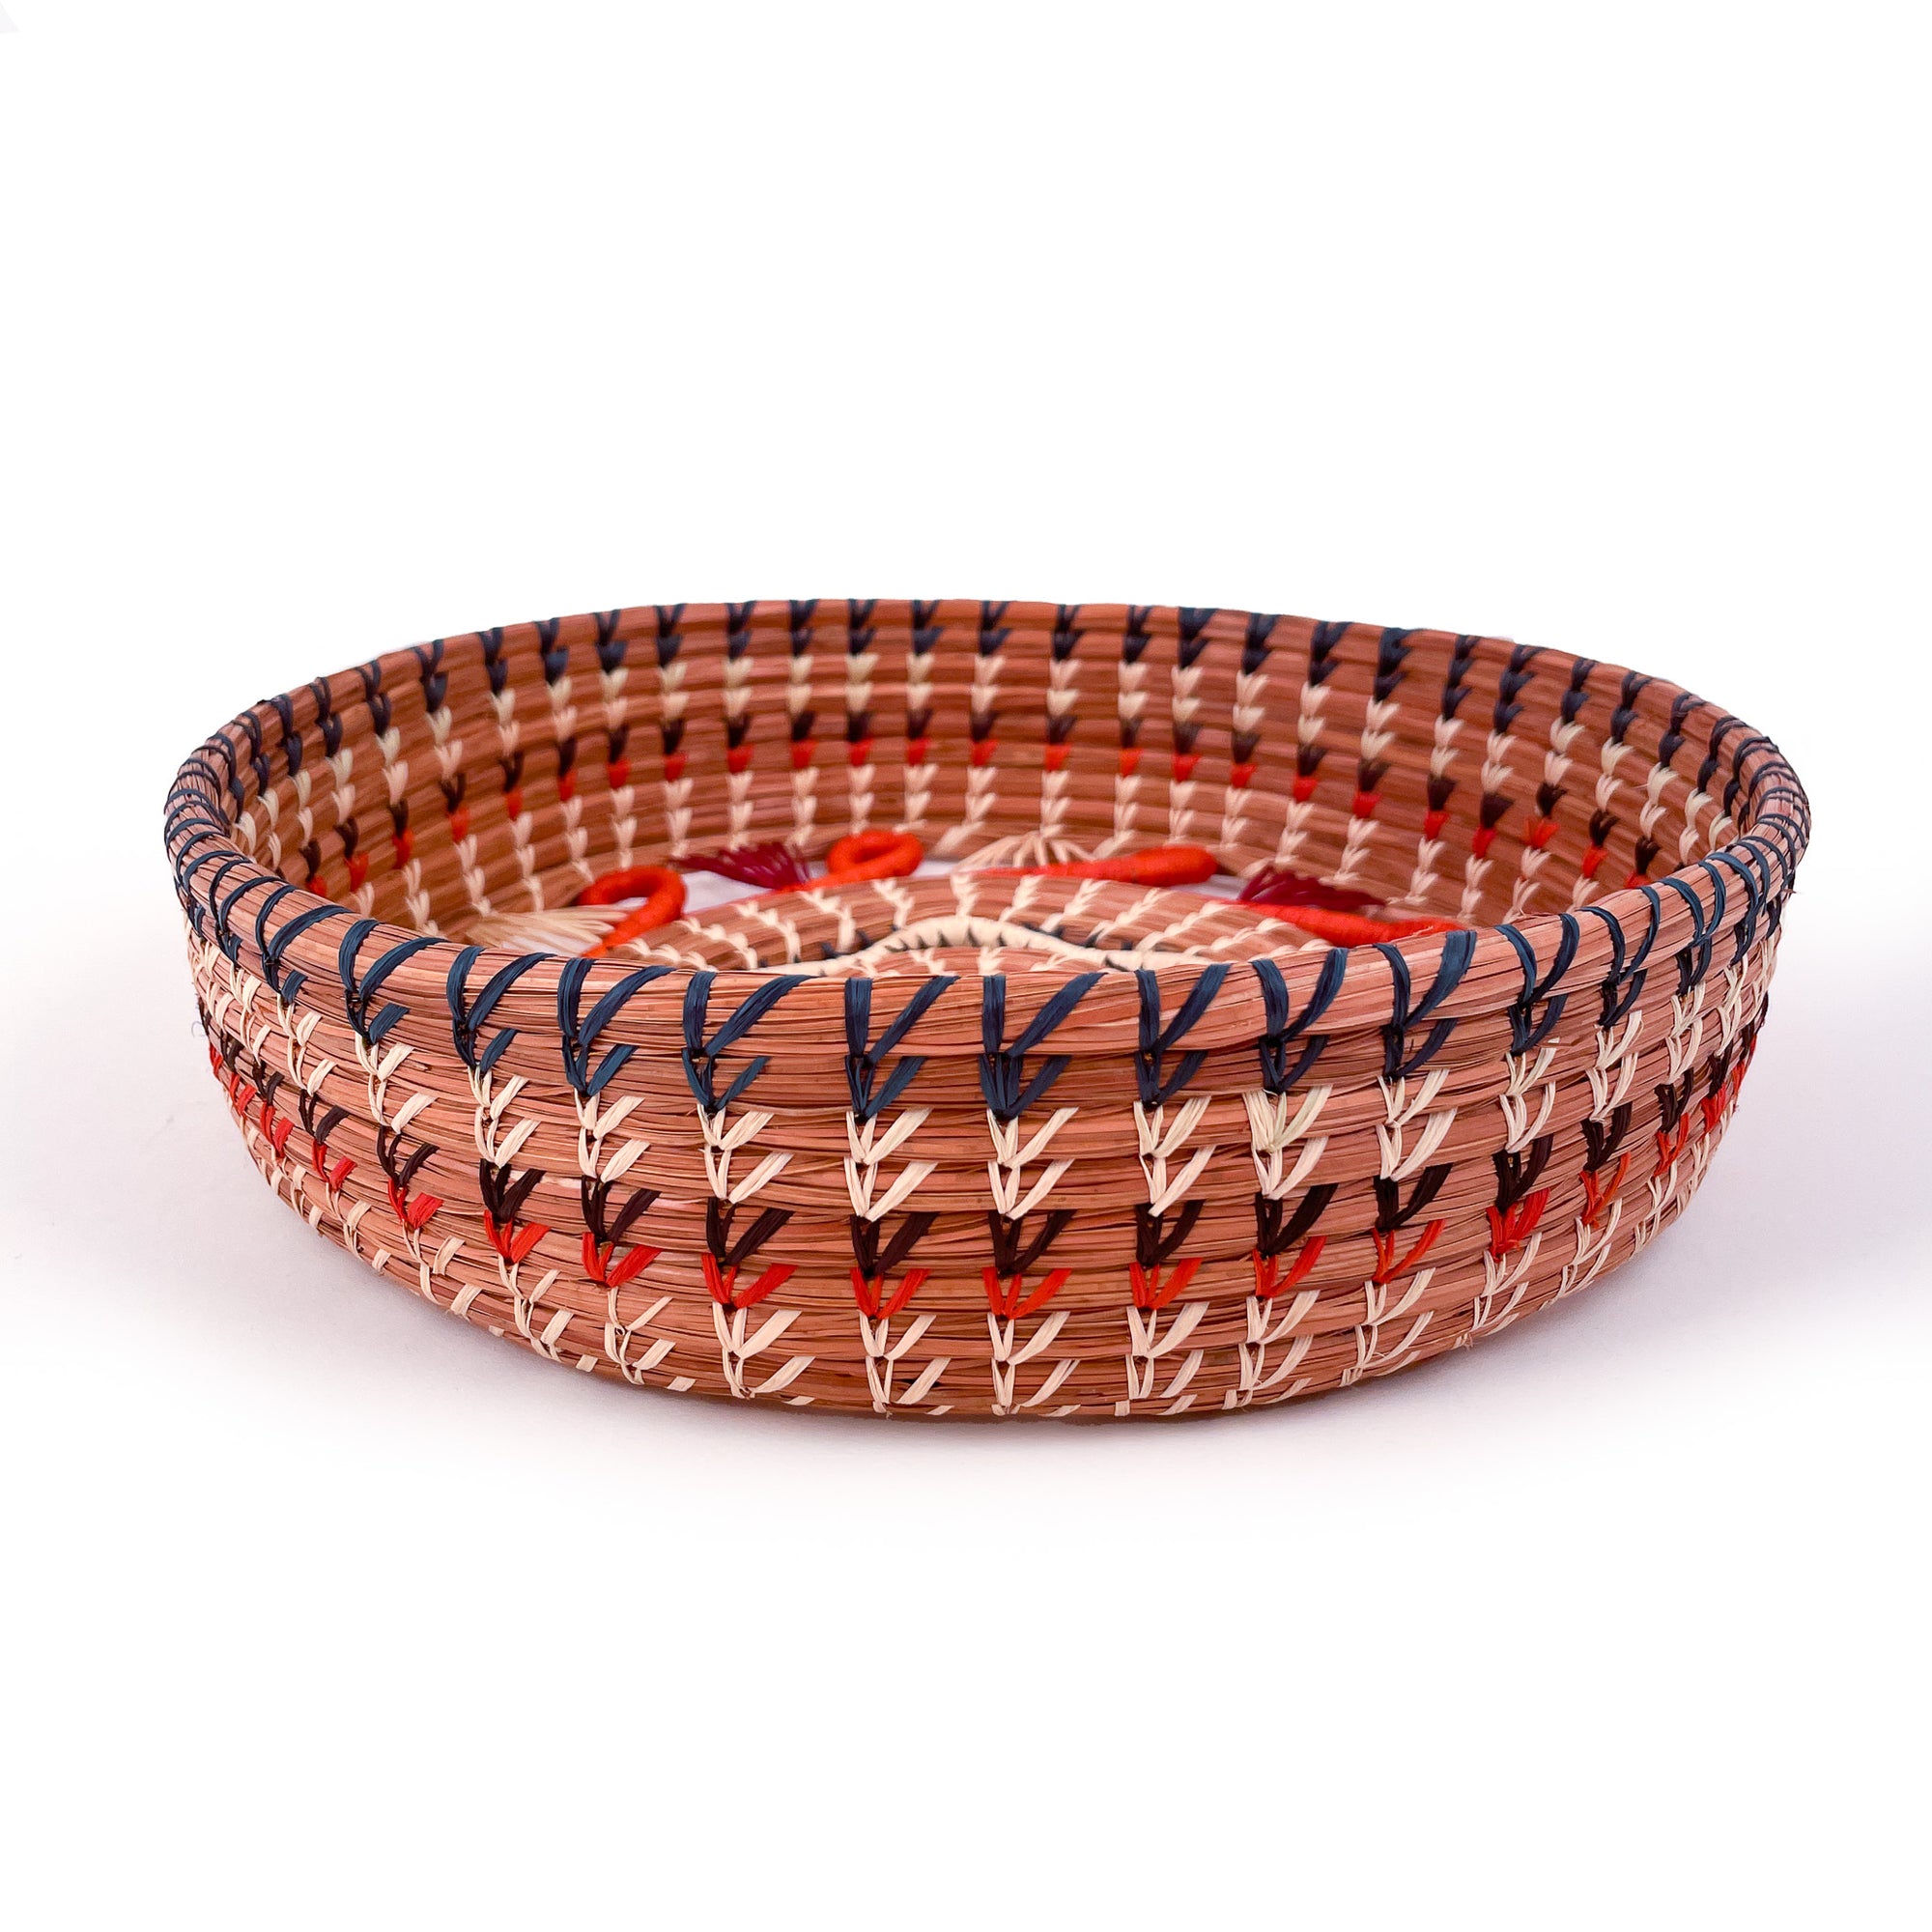 Front-facing view of circular basket with star-shaped accent in center, surrounded by orange loop detail